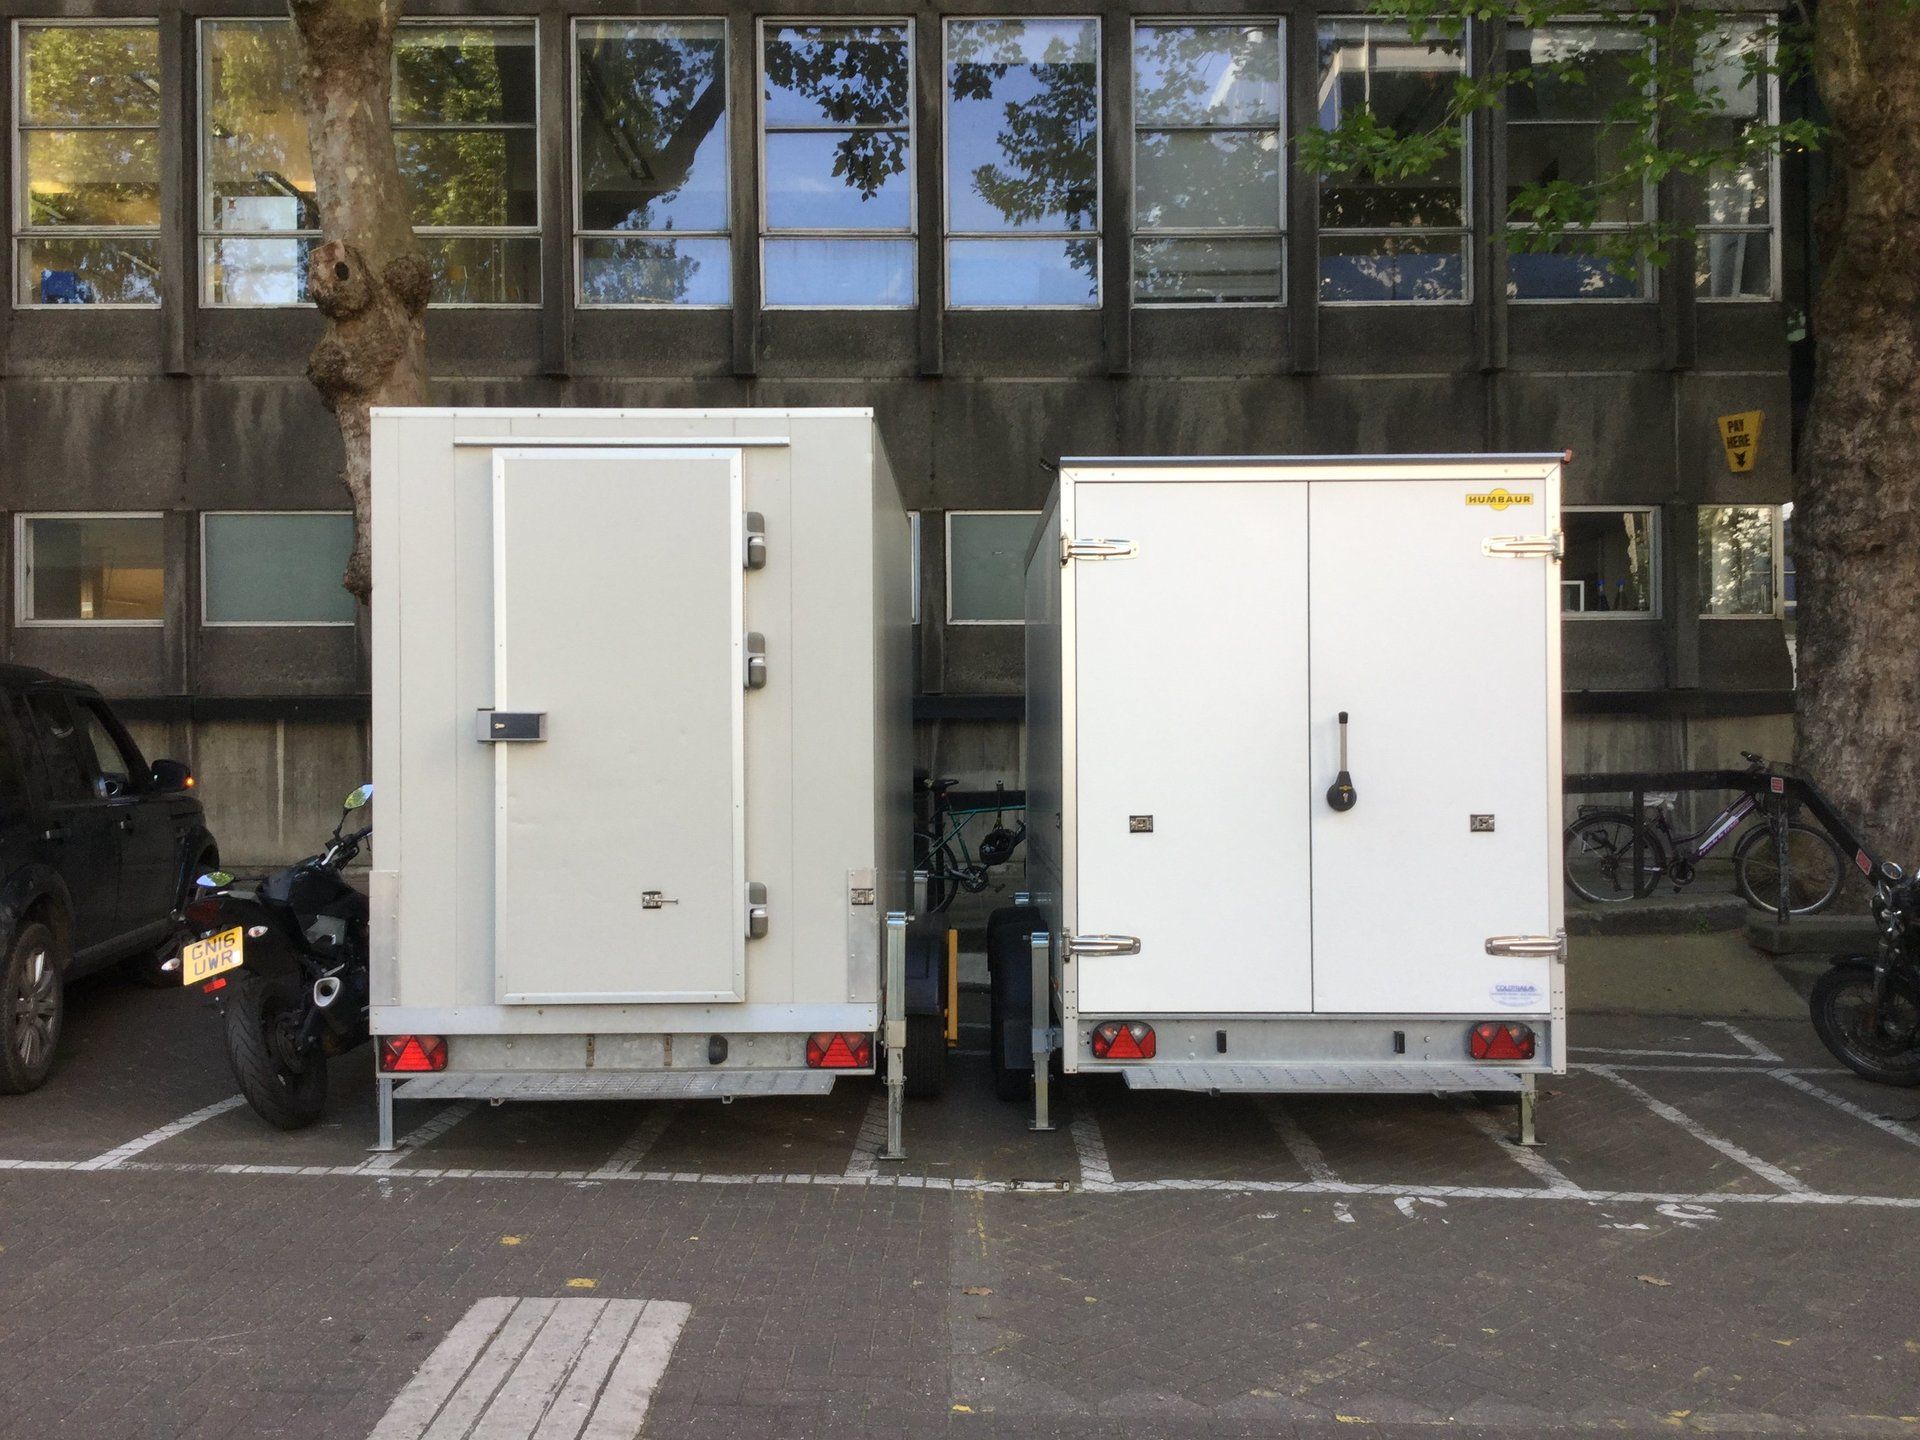 Fridge and Freezer Trailer at Imperial College London May 2017